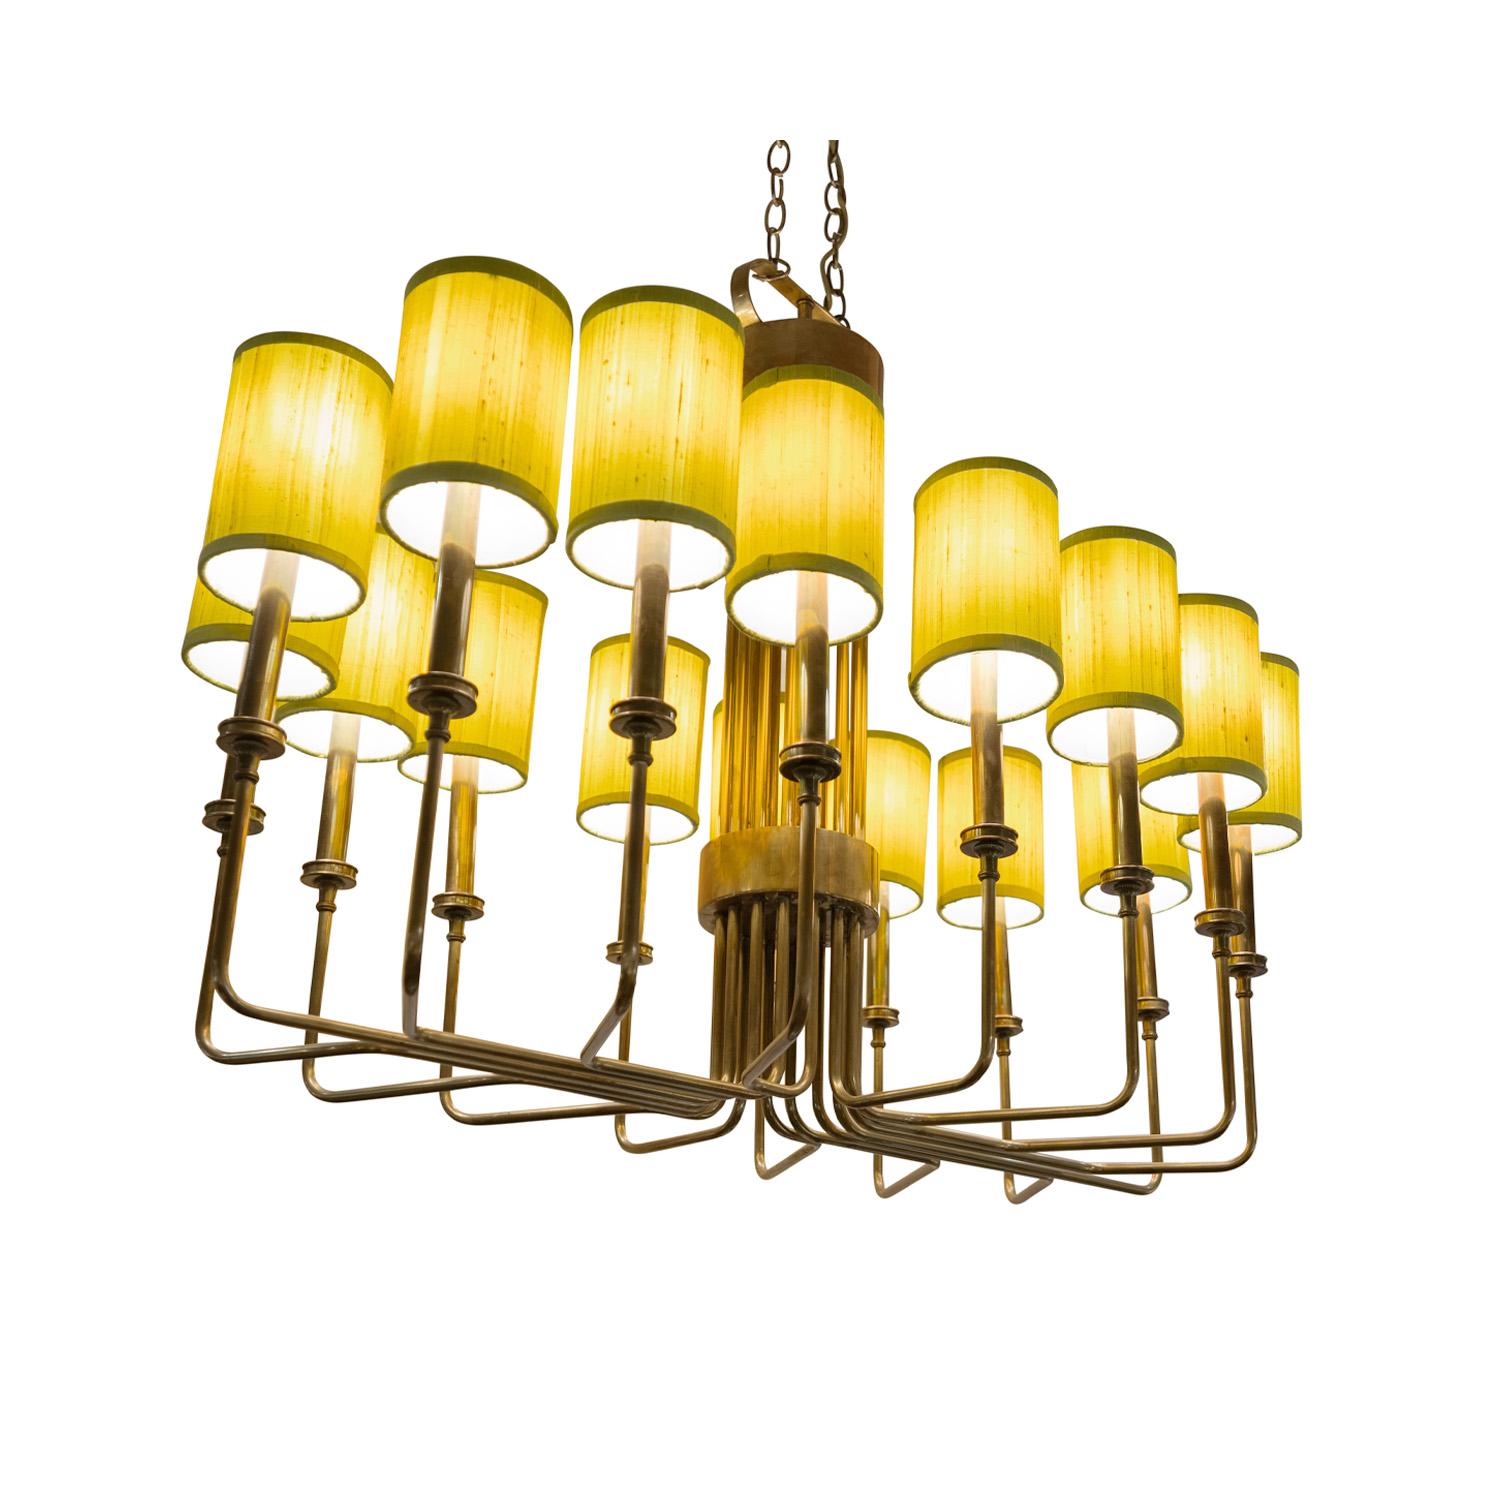 Mid-Century Modern Parzinger Style Large and Impressive Chandelier in Brass, 1950s For Sale